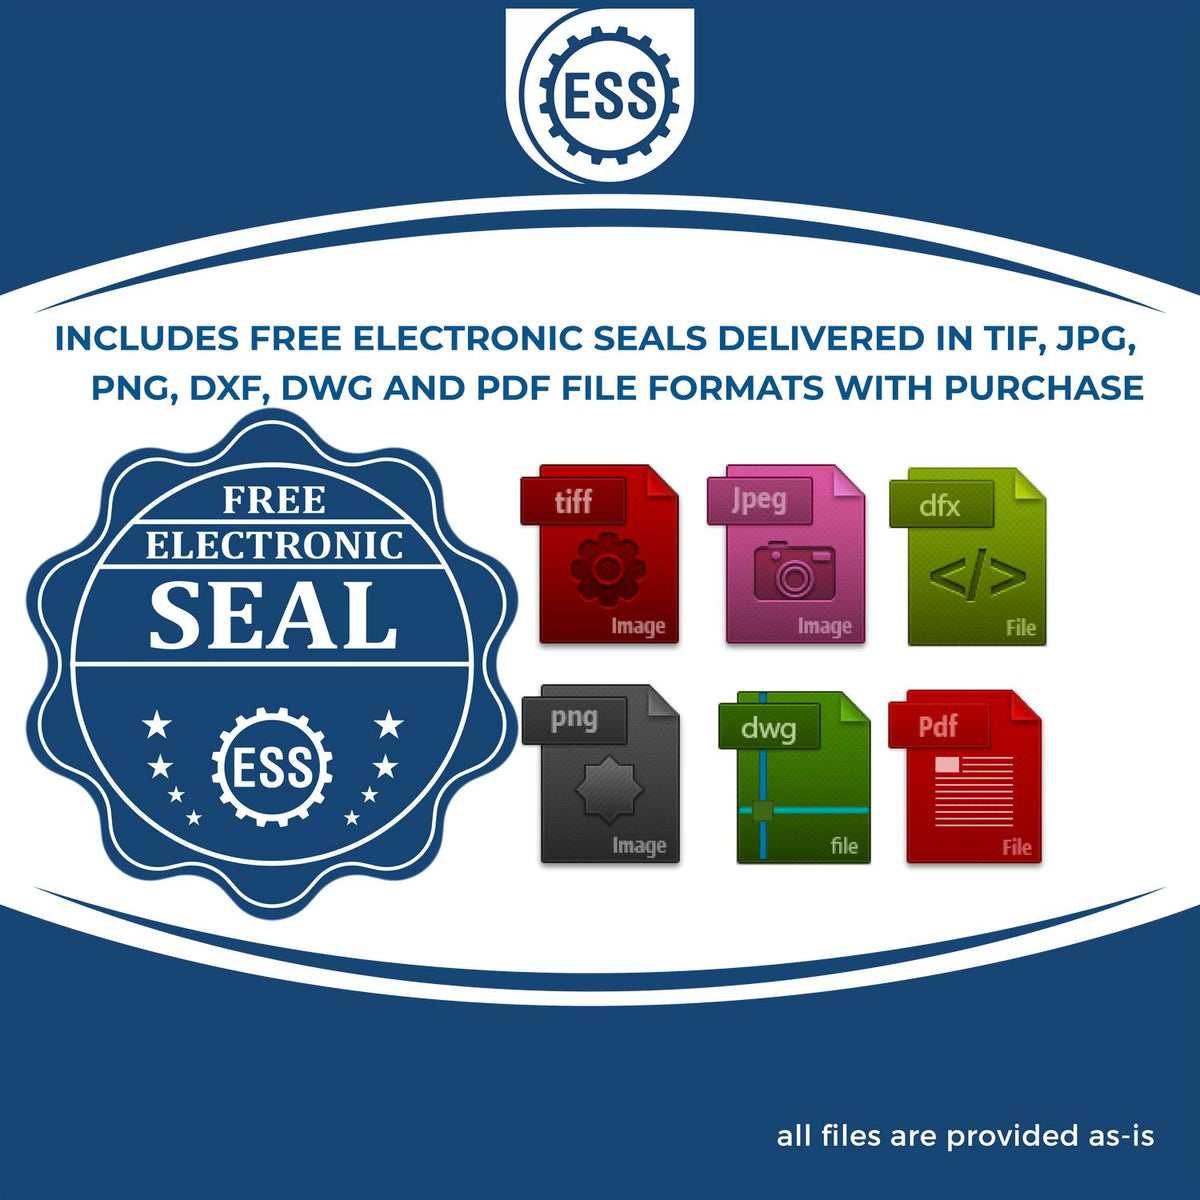 An infographic for the free electronic seal for the Self-Inking Rectangular Arkansas Notary Stamp illustrating the different file type icons such as DXF, DWG, TIF, JPG and PNG.